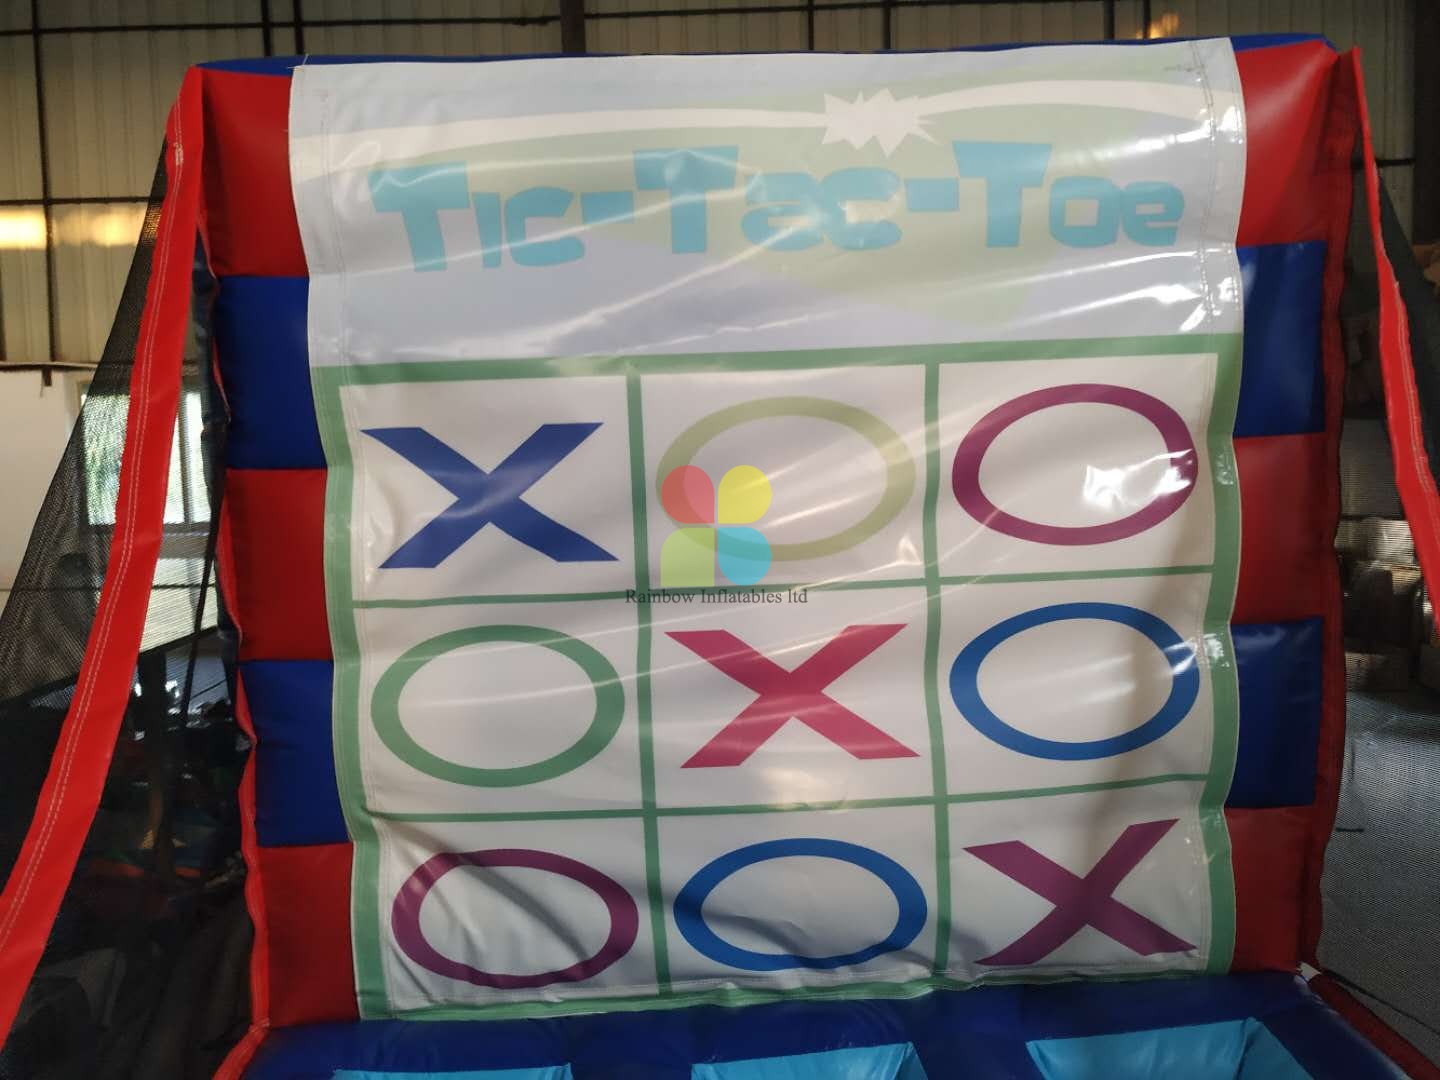 Inflatable Tic-Tac-Toe and Inflatable 4 Spot